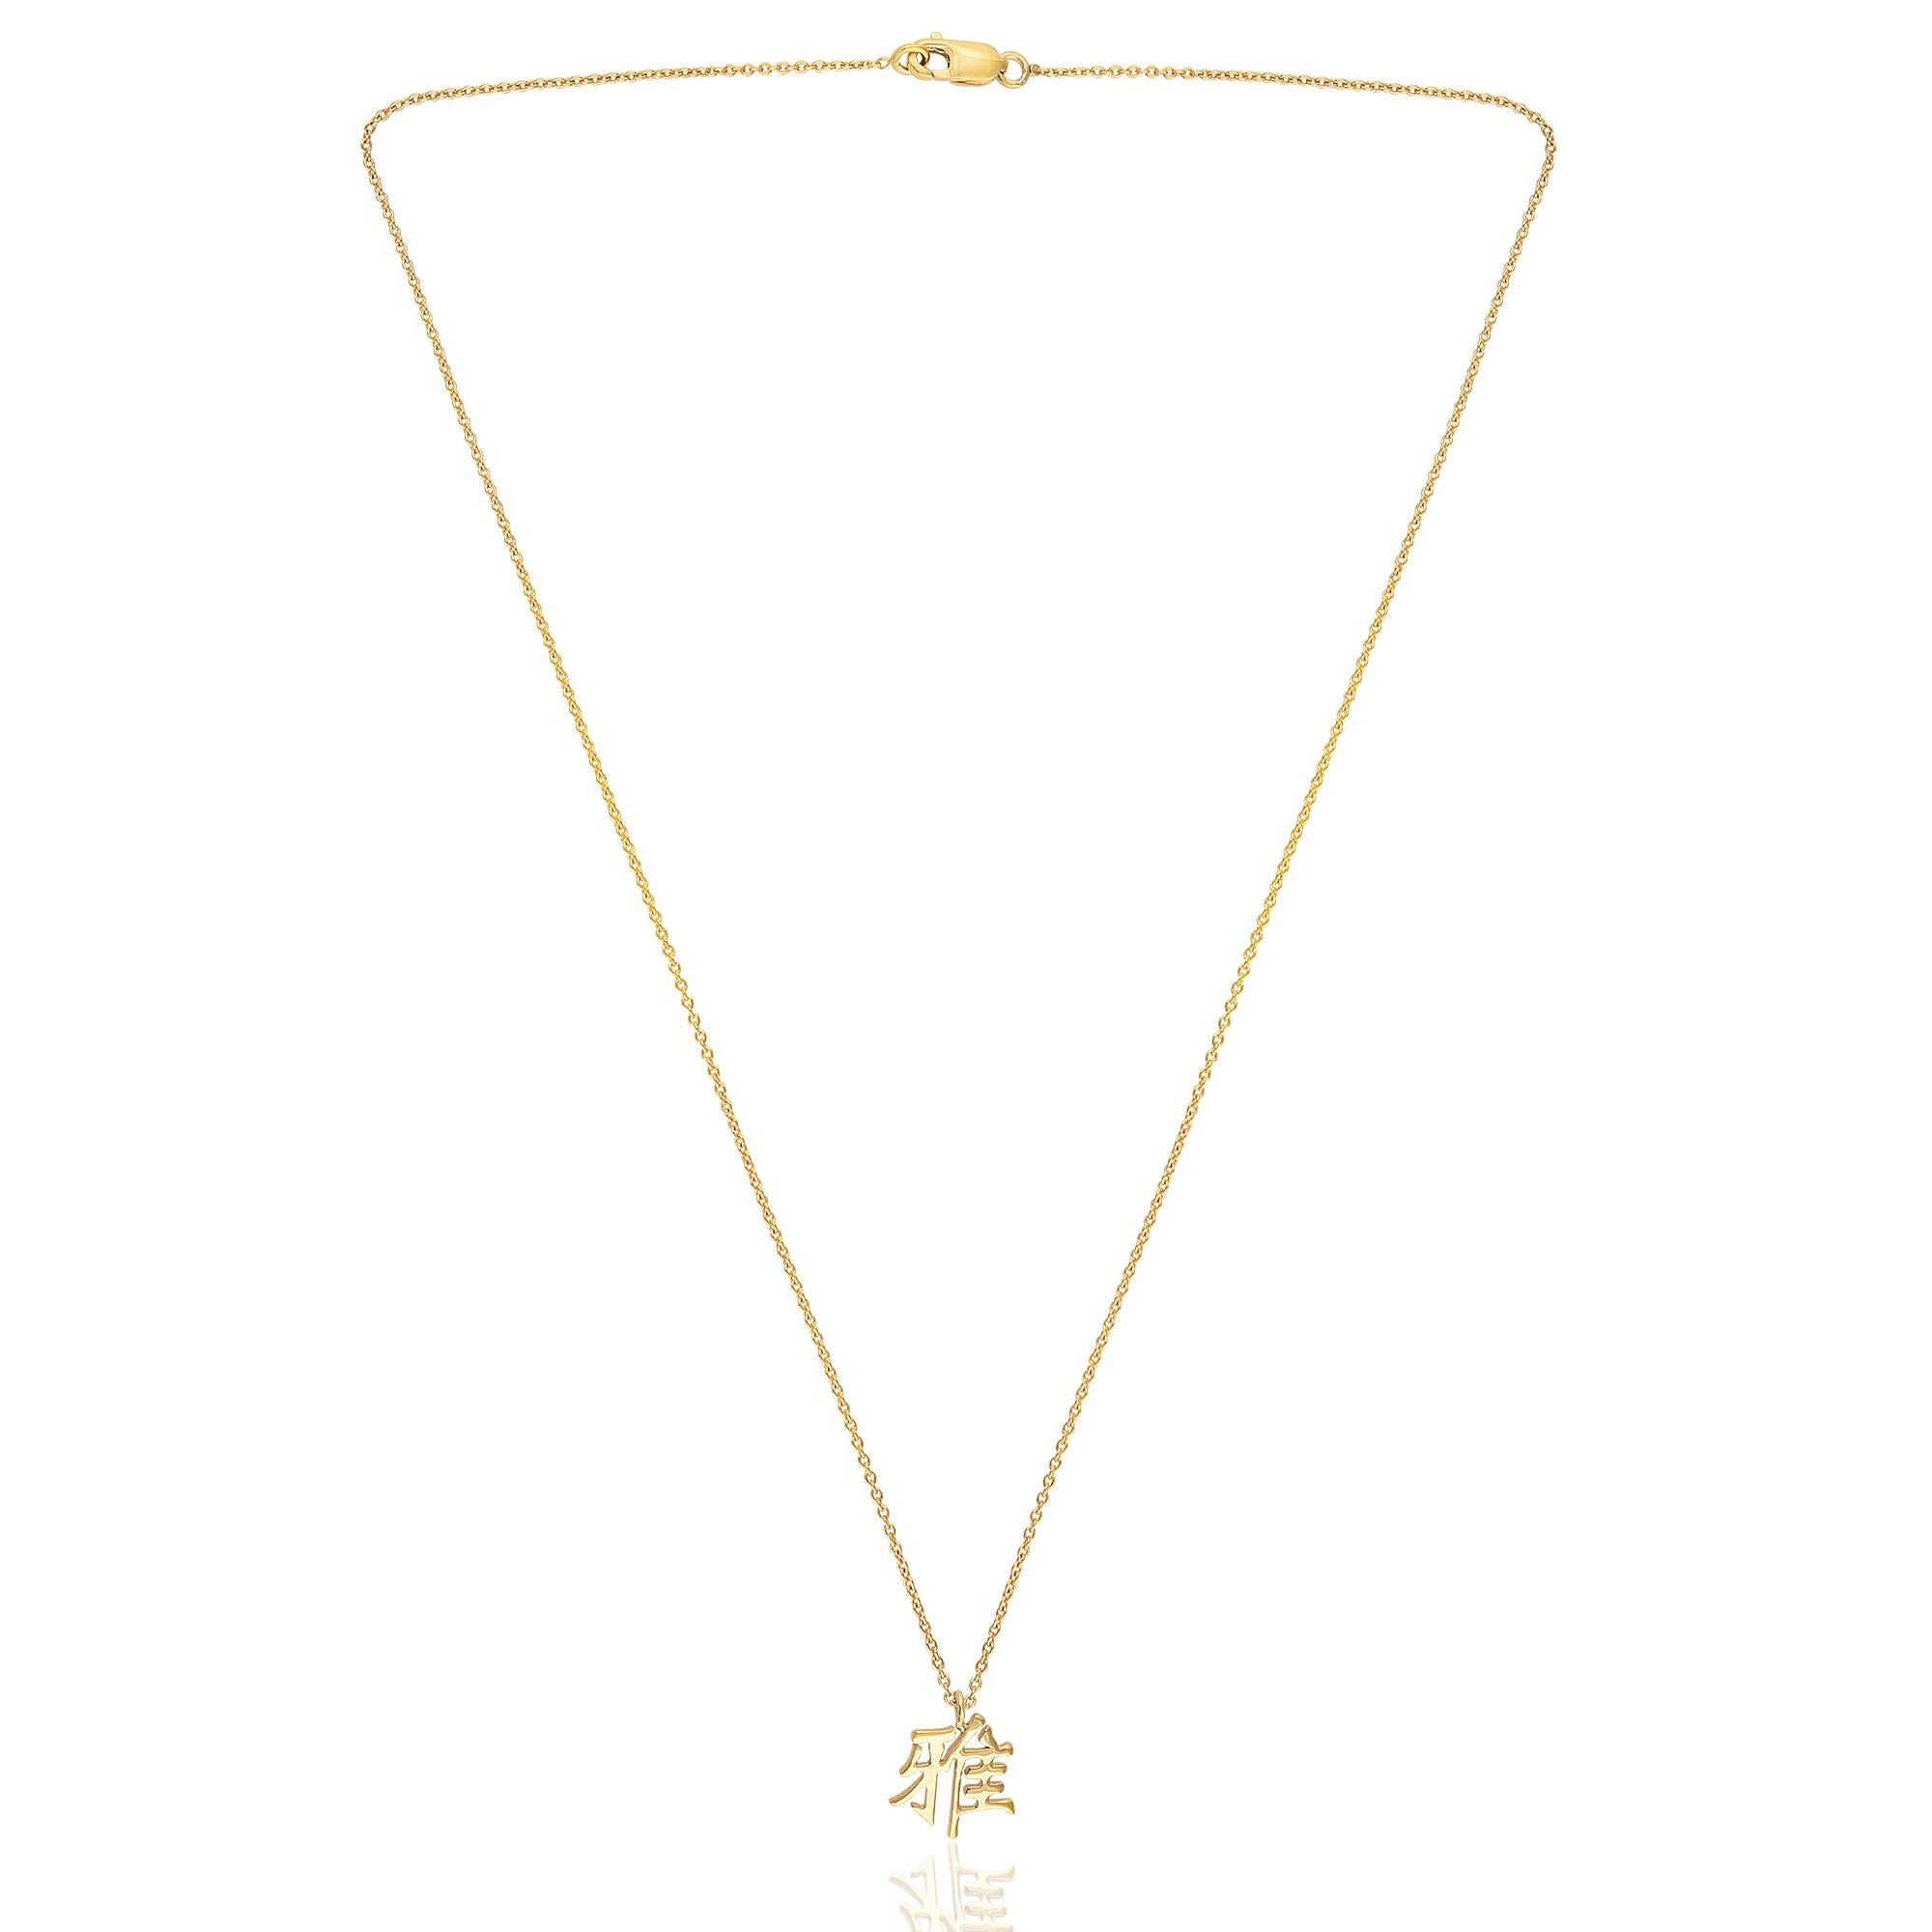 Introducing the delightful 14k Yellow Gold Japanese Kanji Smile Character Symbol Pendant Necklace, a charming piece of jewelry that captures the essence of positivity and joy. Meticulously crafted with exceptional artistry, this necklace features a